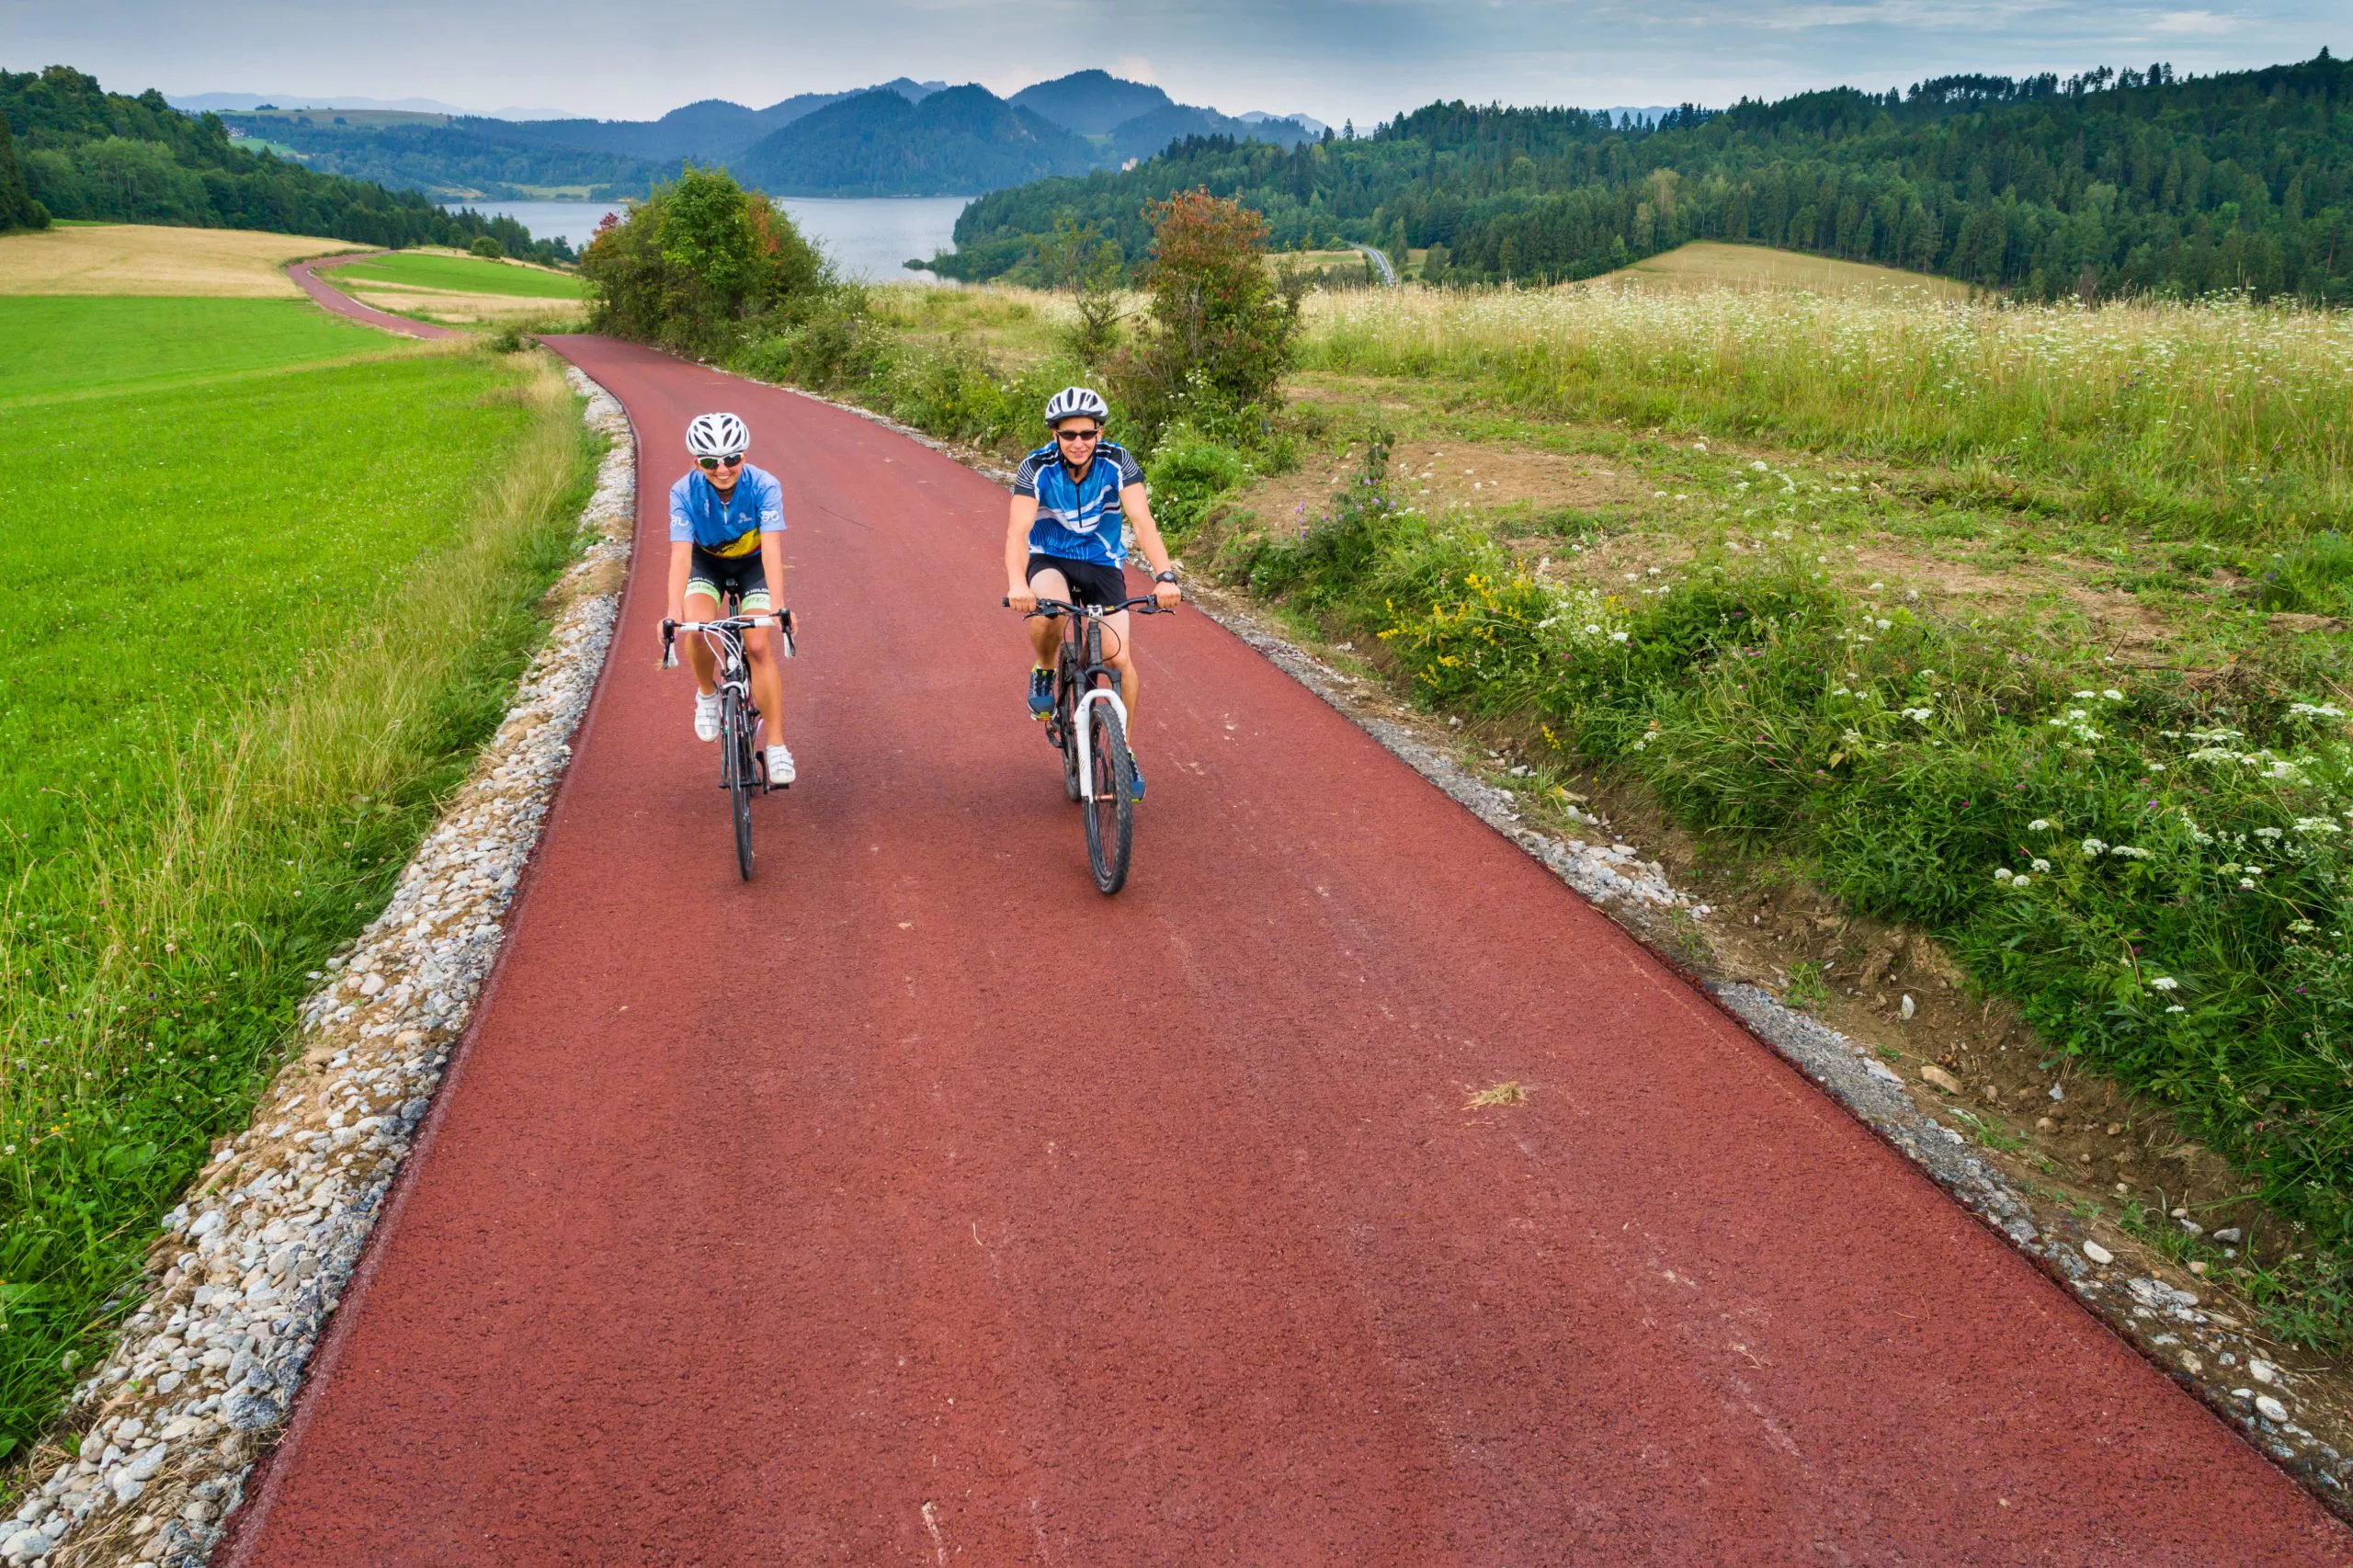 Two people in helmets and blue jerseys ride bikes towards us on a red tarmac cycle path twisting between fields; pale waters of a reservoir surrounded by bluish mountains in the background.